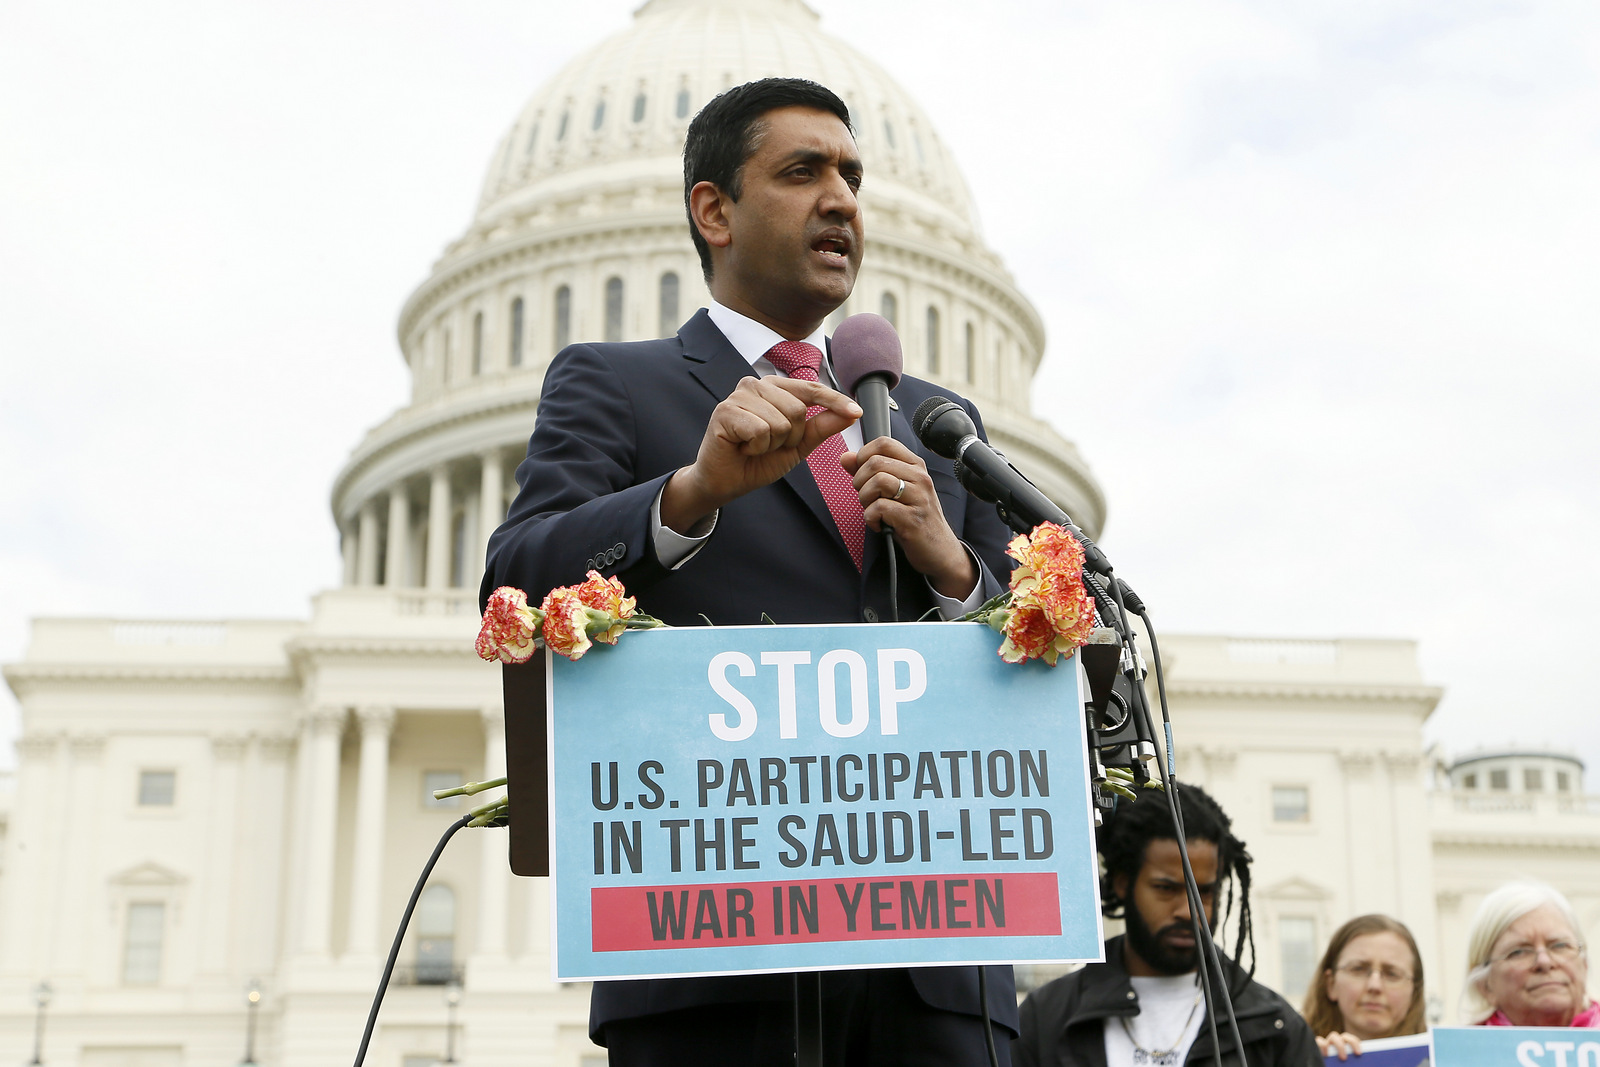 Rep. Ro Khanna (D-CA) speaks at a rally to support a Senate vote sponsored by Sen. Bernie Sanders to withdraw U.S. military support for Saudi Arabia's bombing of Yemen at the U.S. Capitol Building on, March 19, 2018 in Washington D.C. The rally was organized on the eve of bilateral talks between U.S. President Trump and the Saudi Crown Prince. (Paul Morigi/AP for Avaaz)